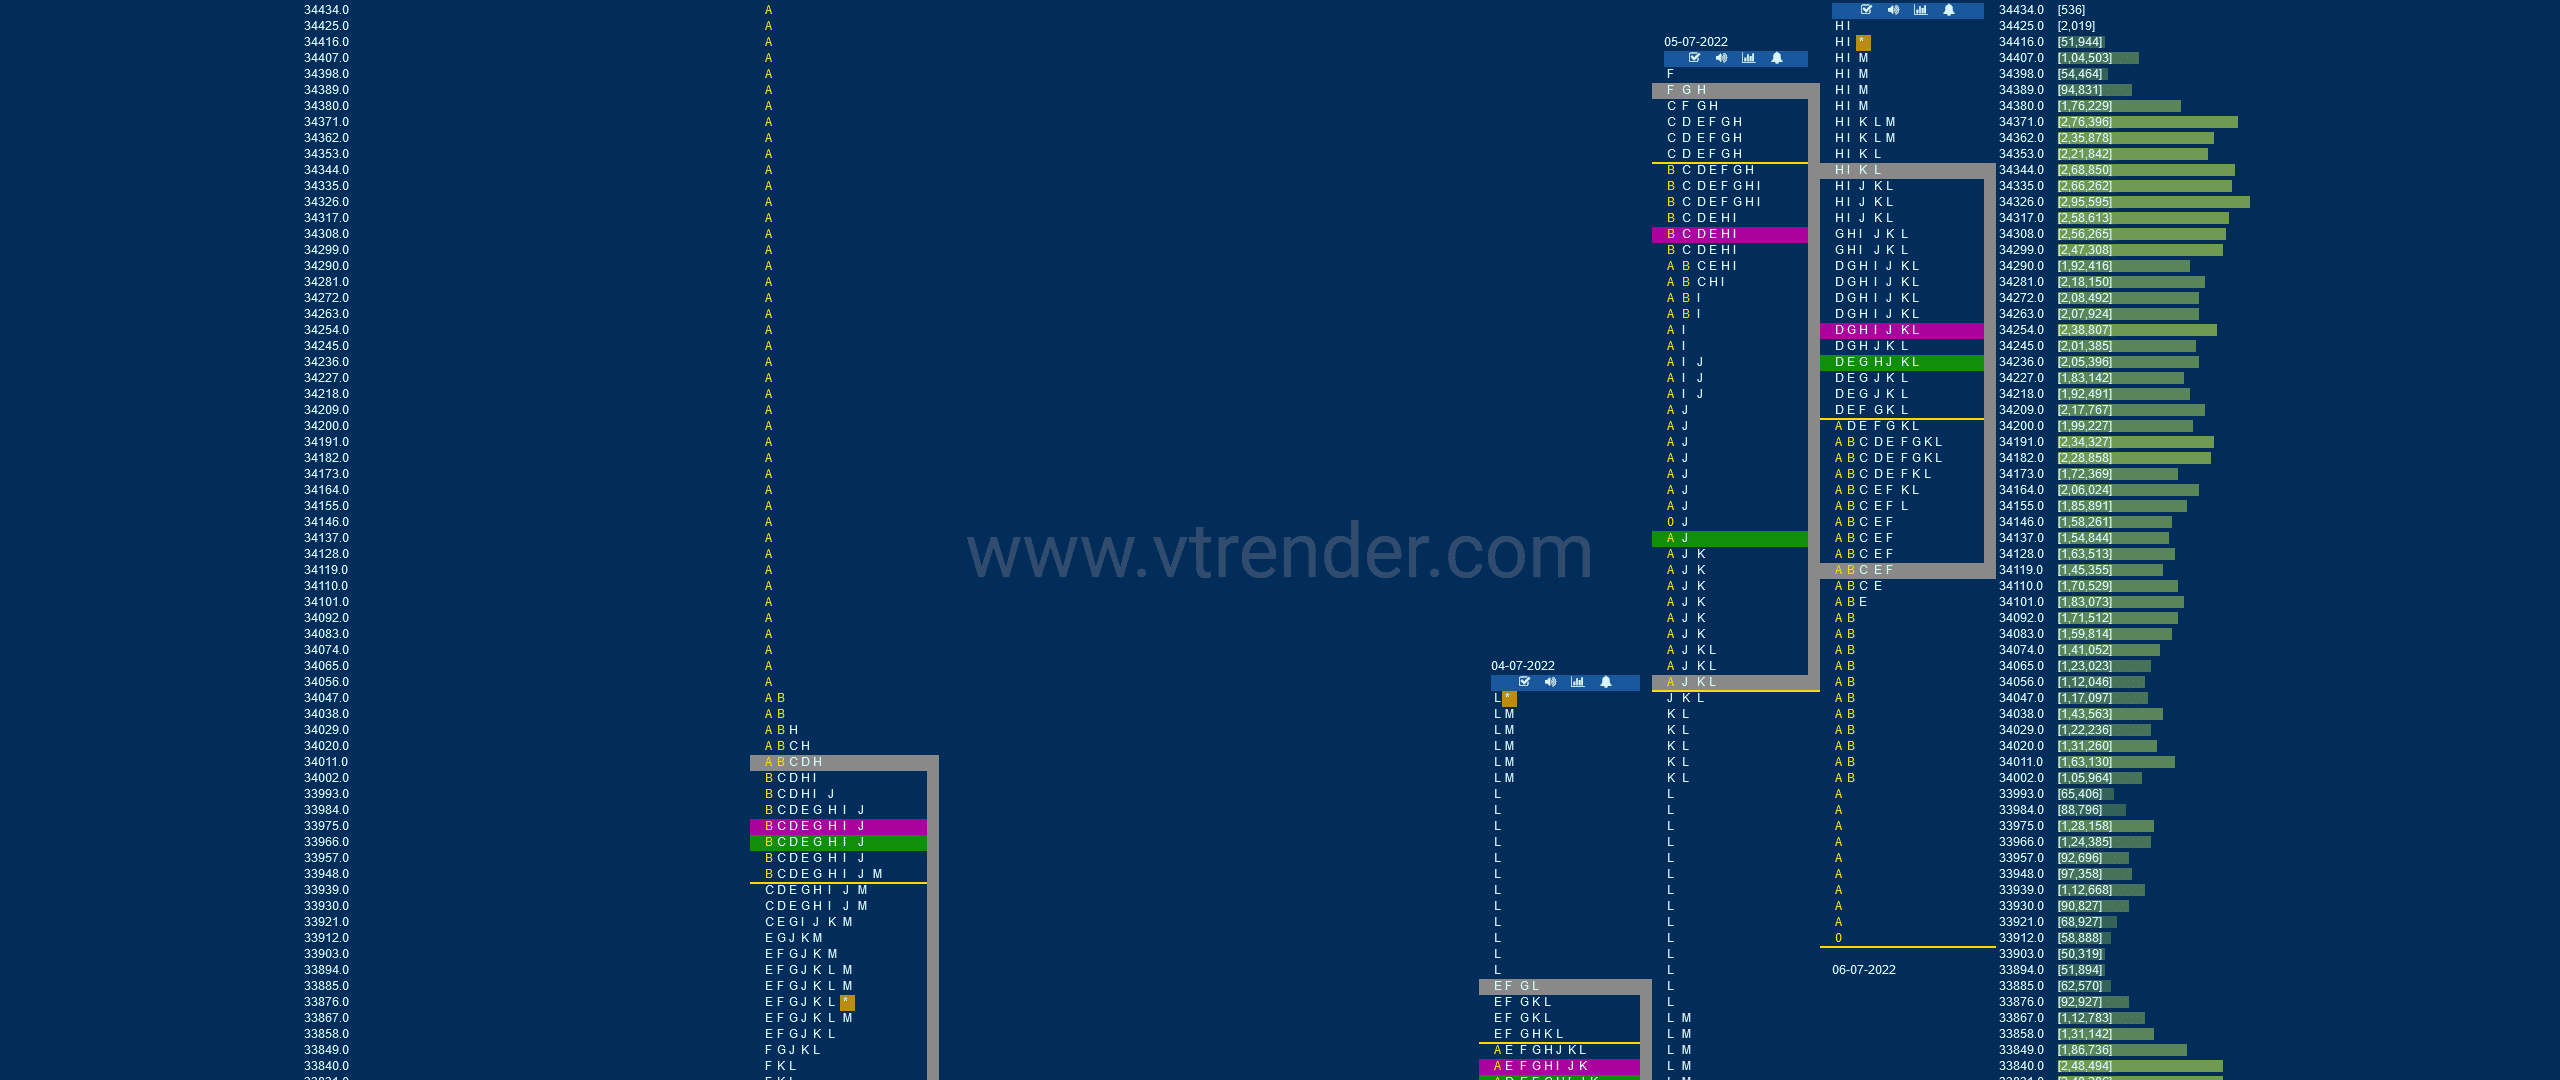 Bnf 4 Market Profile Analysis Dated 06Th Jul 2022 Banknifty Futures, Charts, Day Trading, Intraday Trading, Intraday Trading Strategies, Market Profile, Market Profile Trading Strategies, Nifty Futures, Order Flow Analysis, Support And Resistance, Technical Analysis, Trading Strategies, Volume Profile Trading